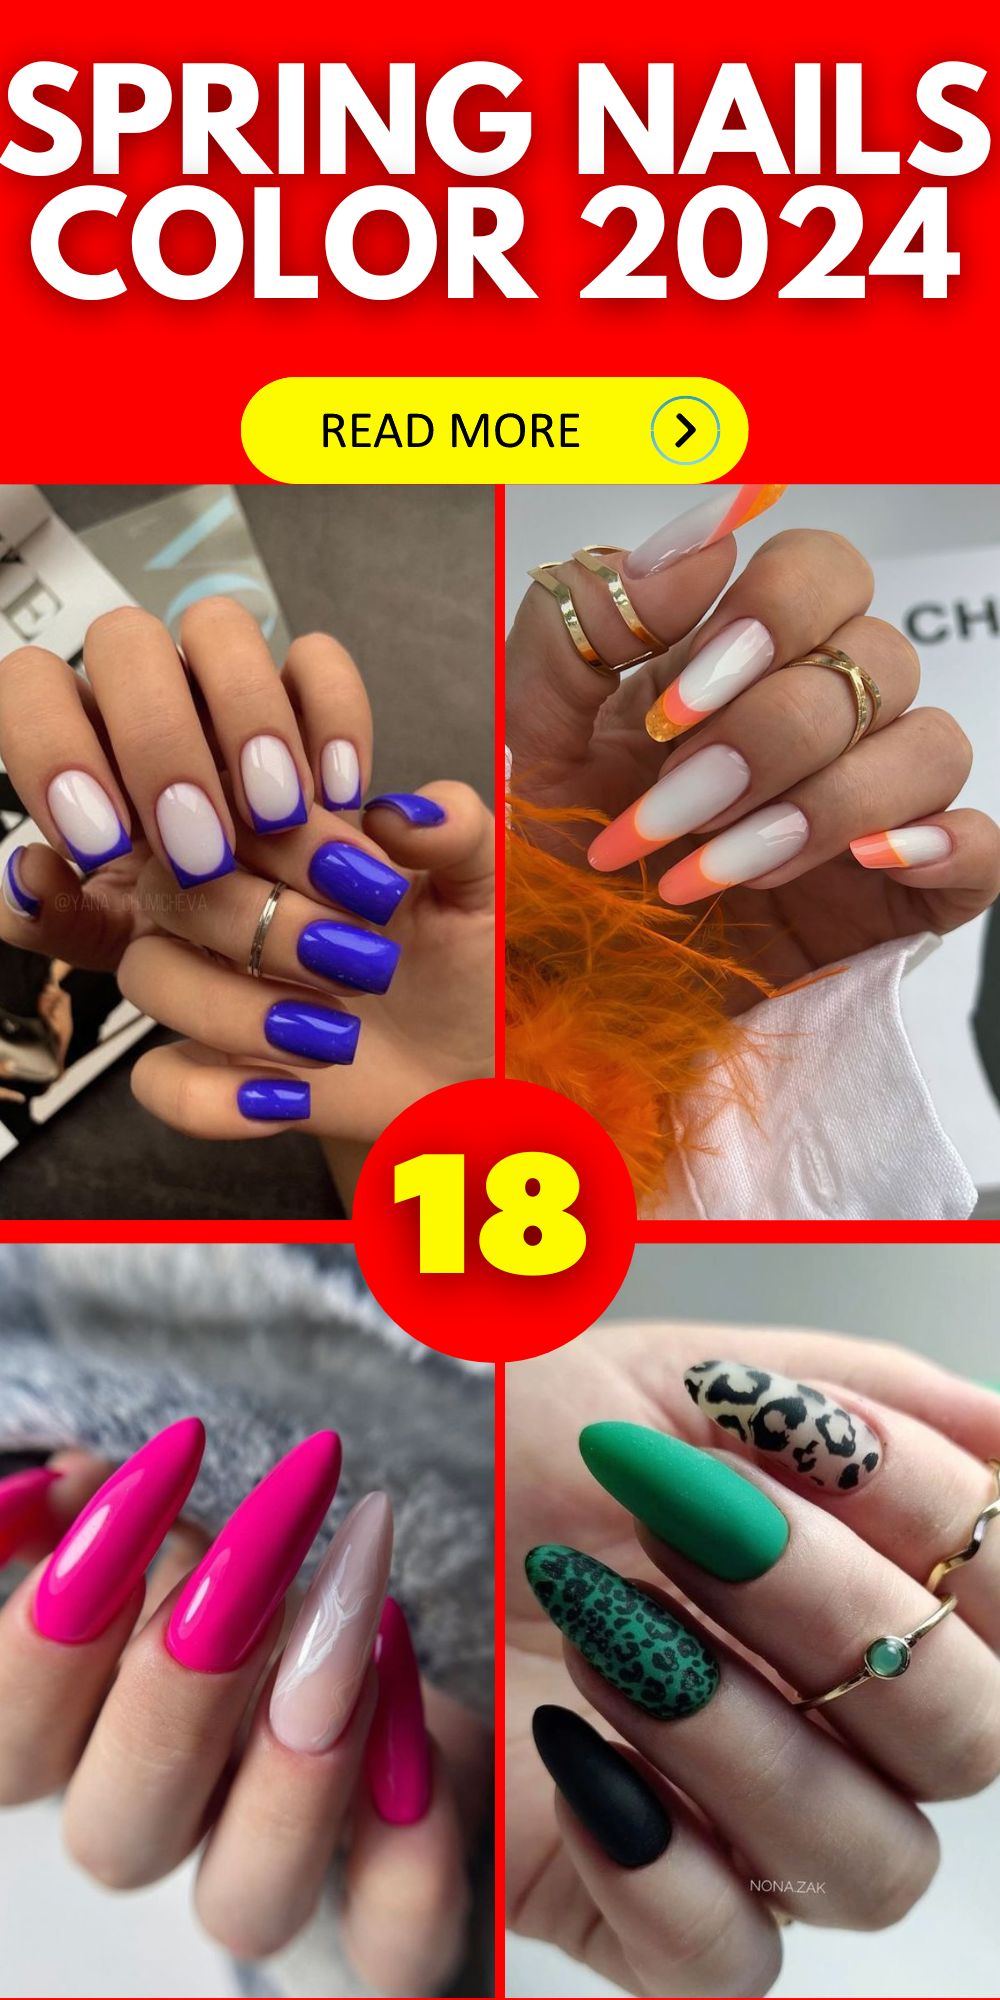 Explore the Best Spring 2024 Nail Color Trends - Bright, Fun, and Chic